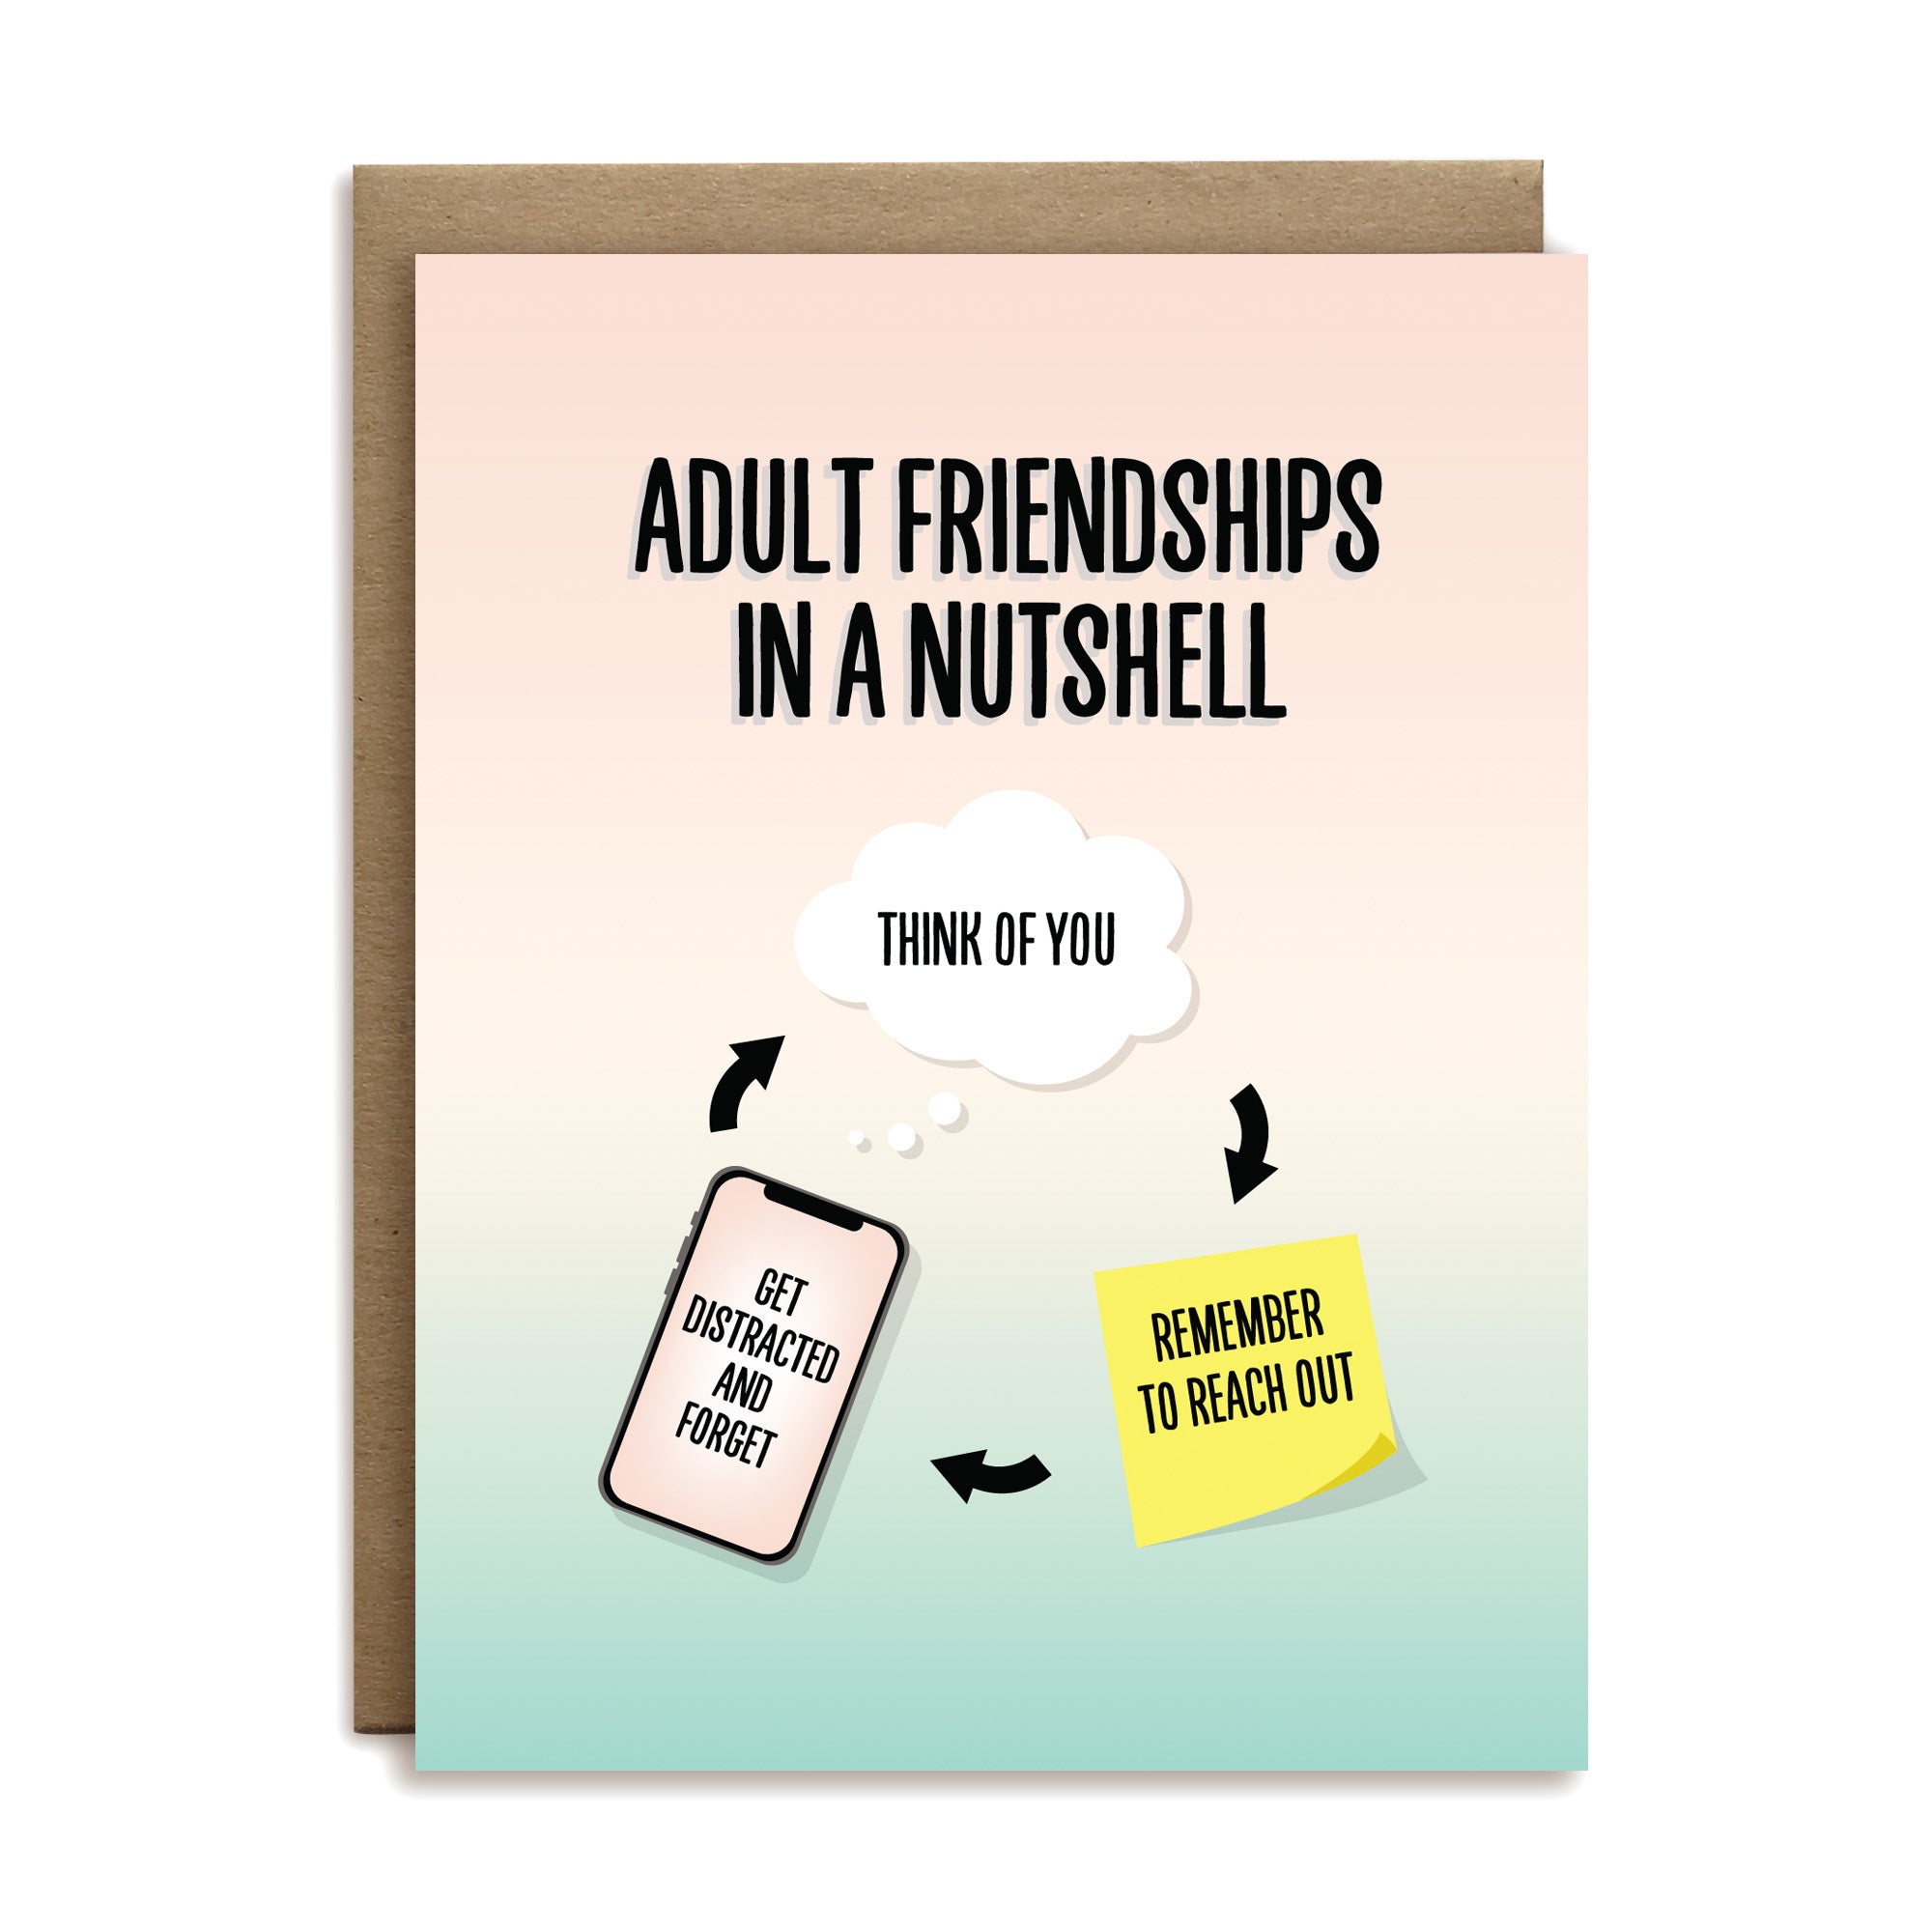 Adults friendship in a nutshell: thinking of you, remember to reach out, get distracted and forget friendship greeting card by I&